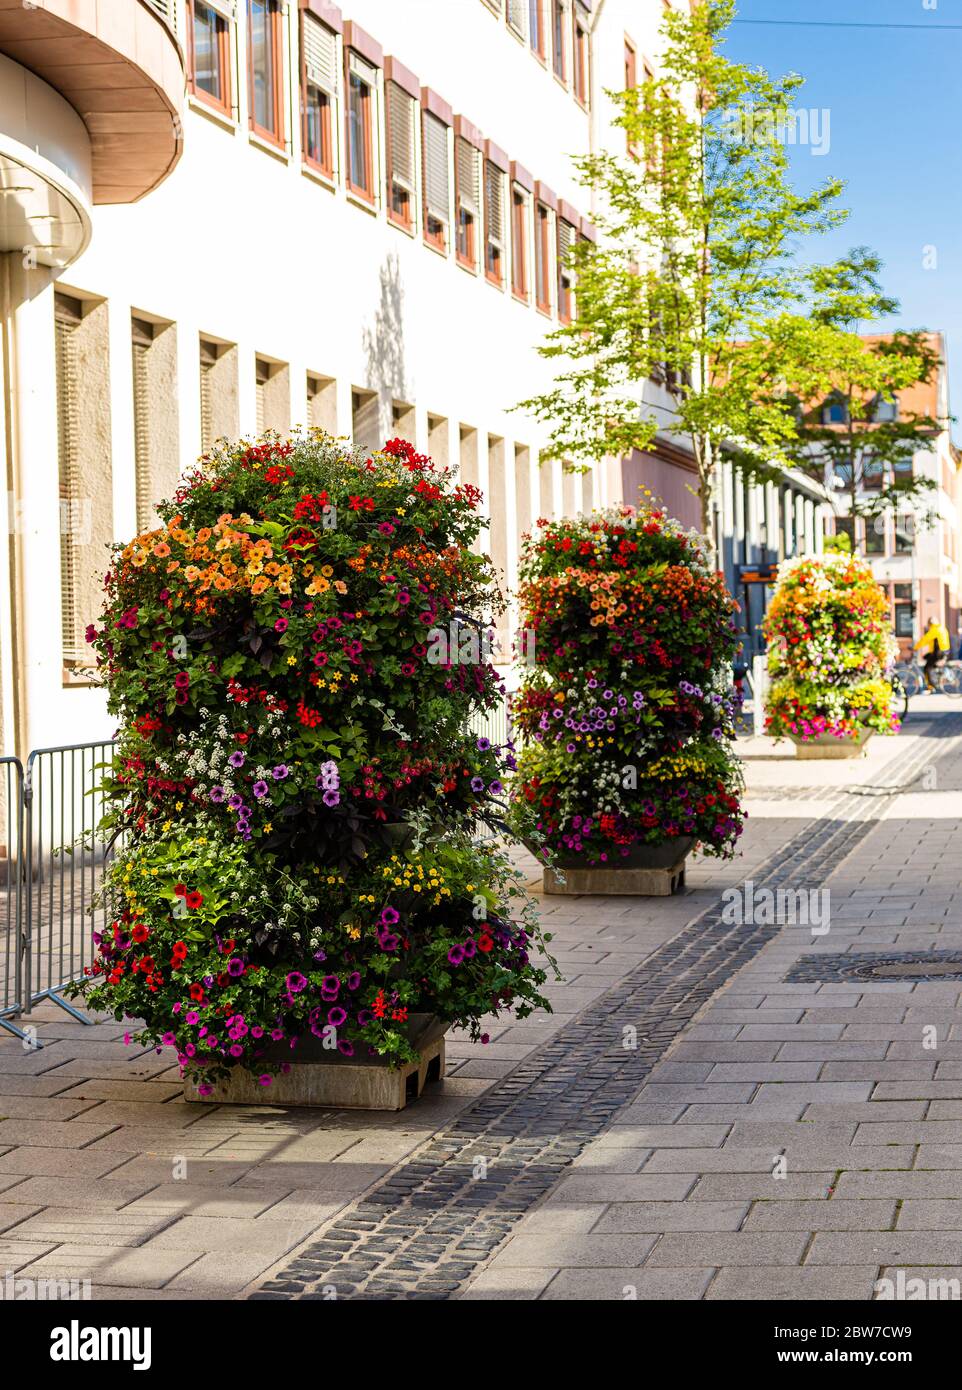 Beautiful flower beds. Colorful flowers. Street decoration. Urban architecture. Stock Photo